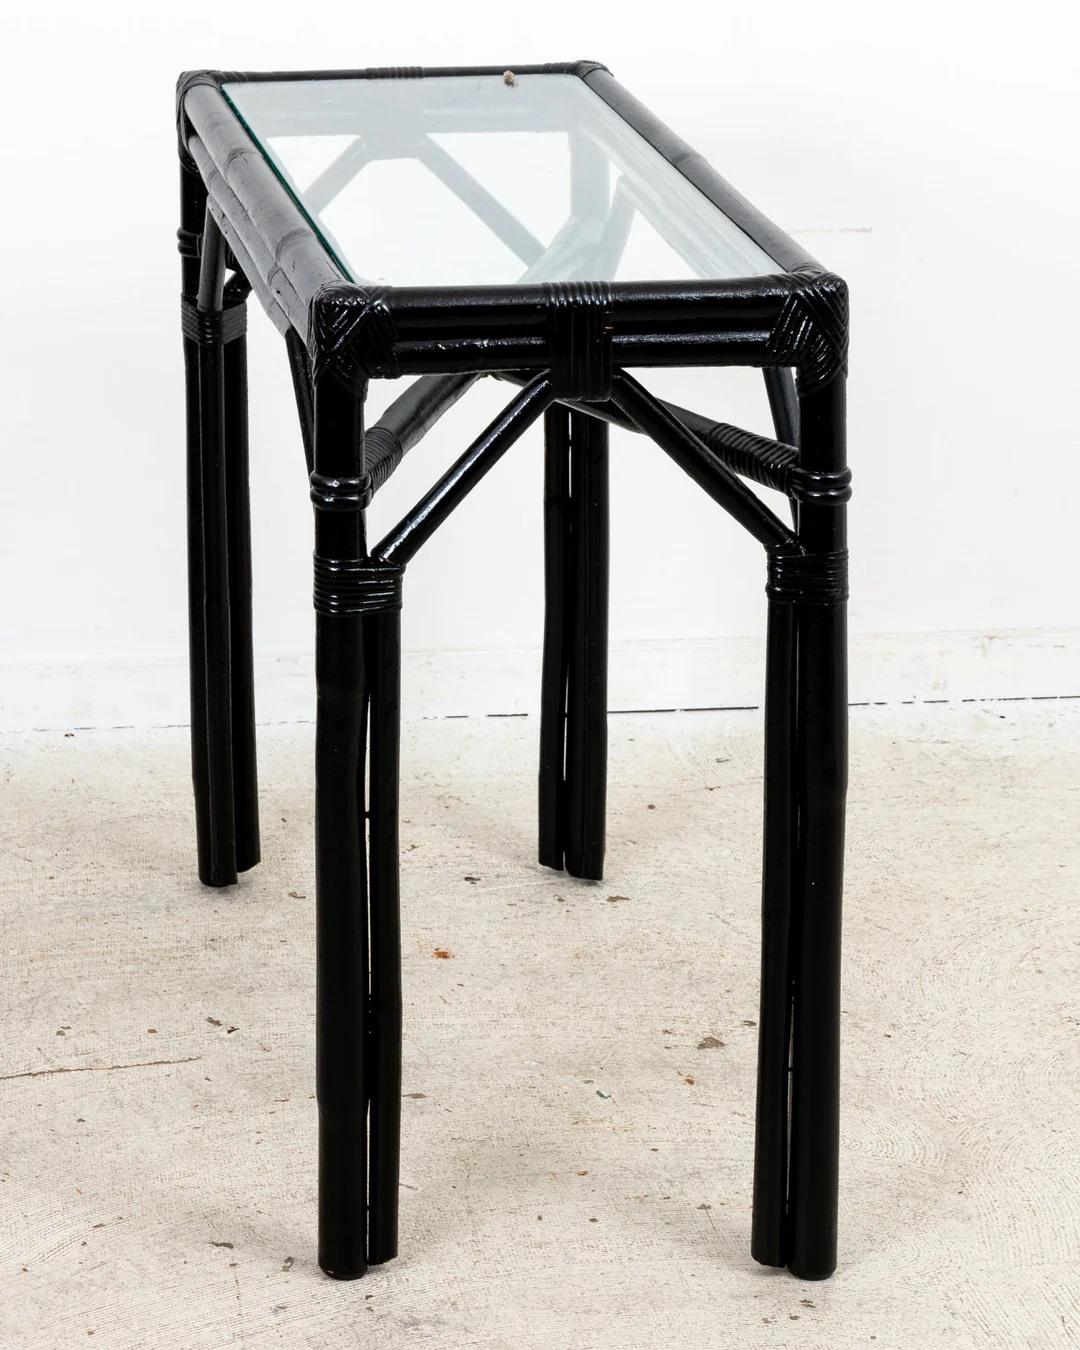 circa late 20th century Hollywood Regency style bamboo console table in a black painted finish with newer glass top. Please note of wear consistent with age. Good overall condition.